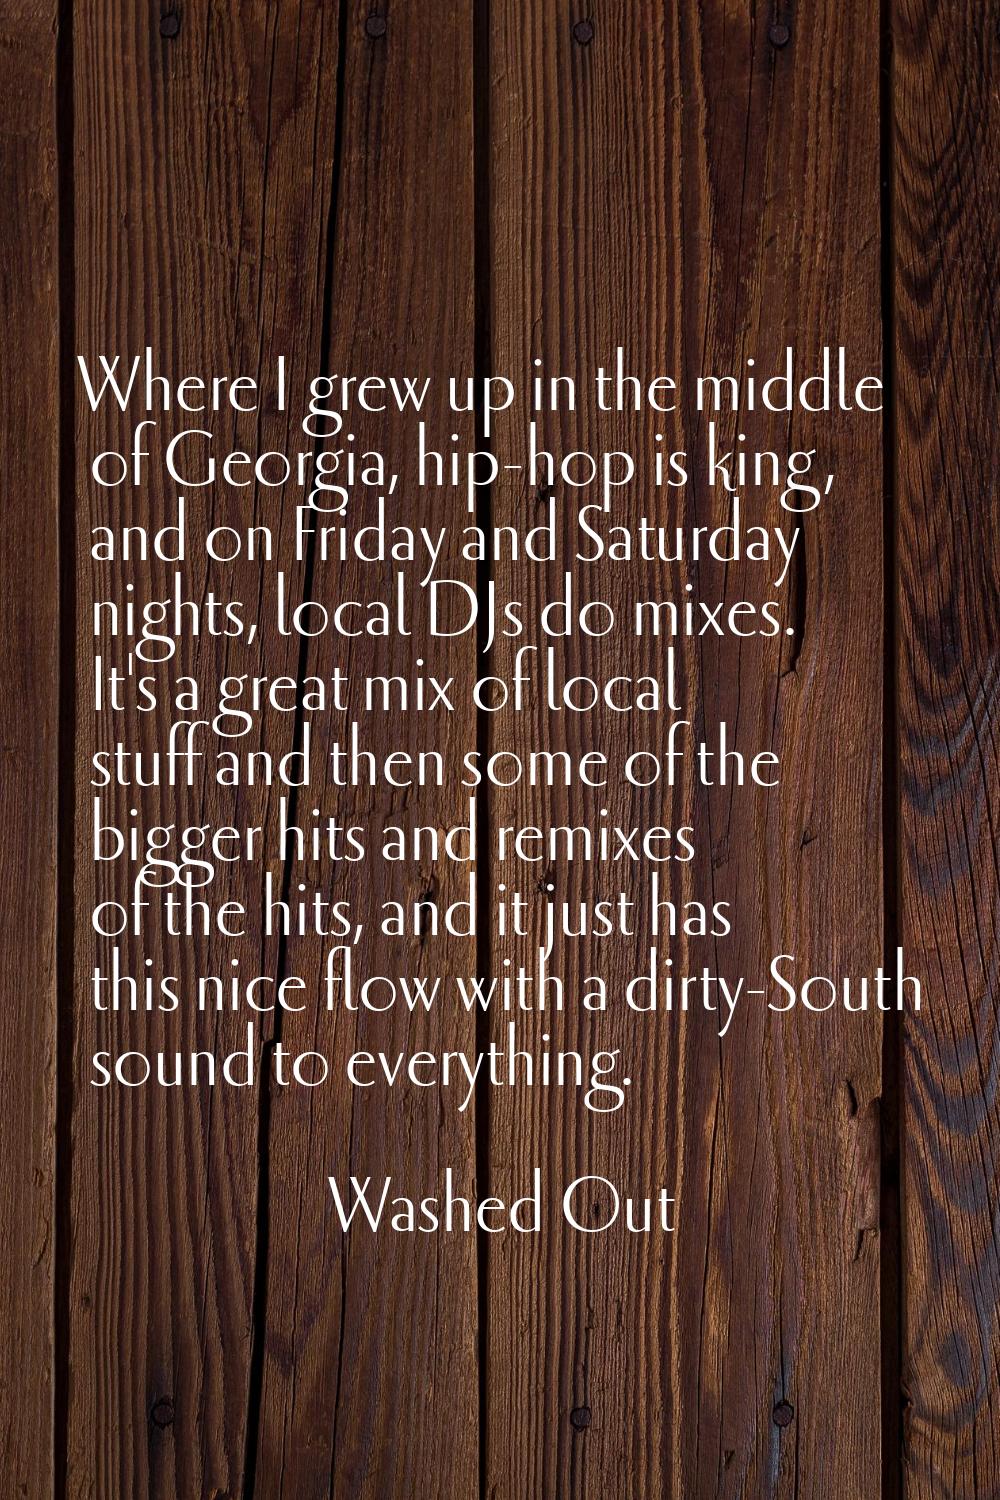 Where I grew up in the middle of Georgia, hip-hop is king, and on Friday and Saturday nights, local